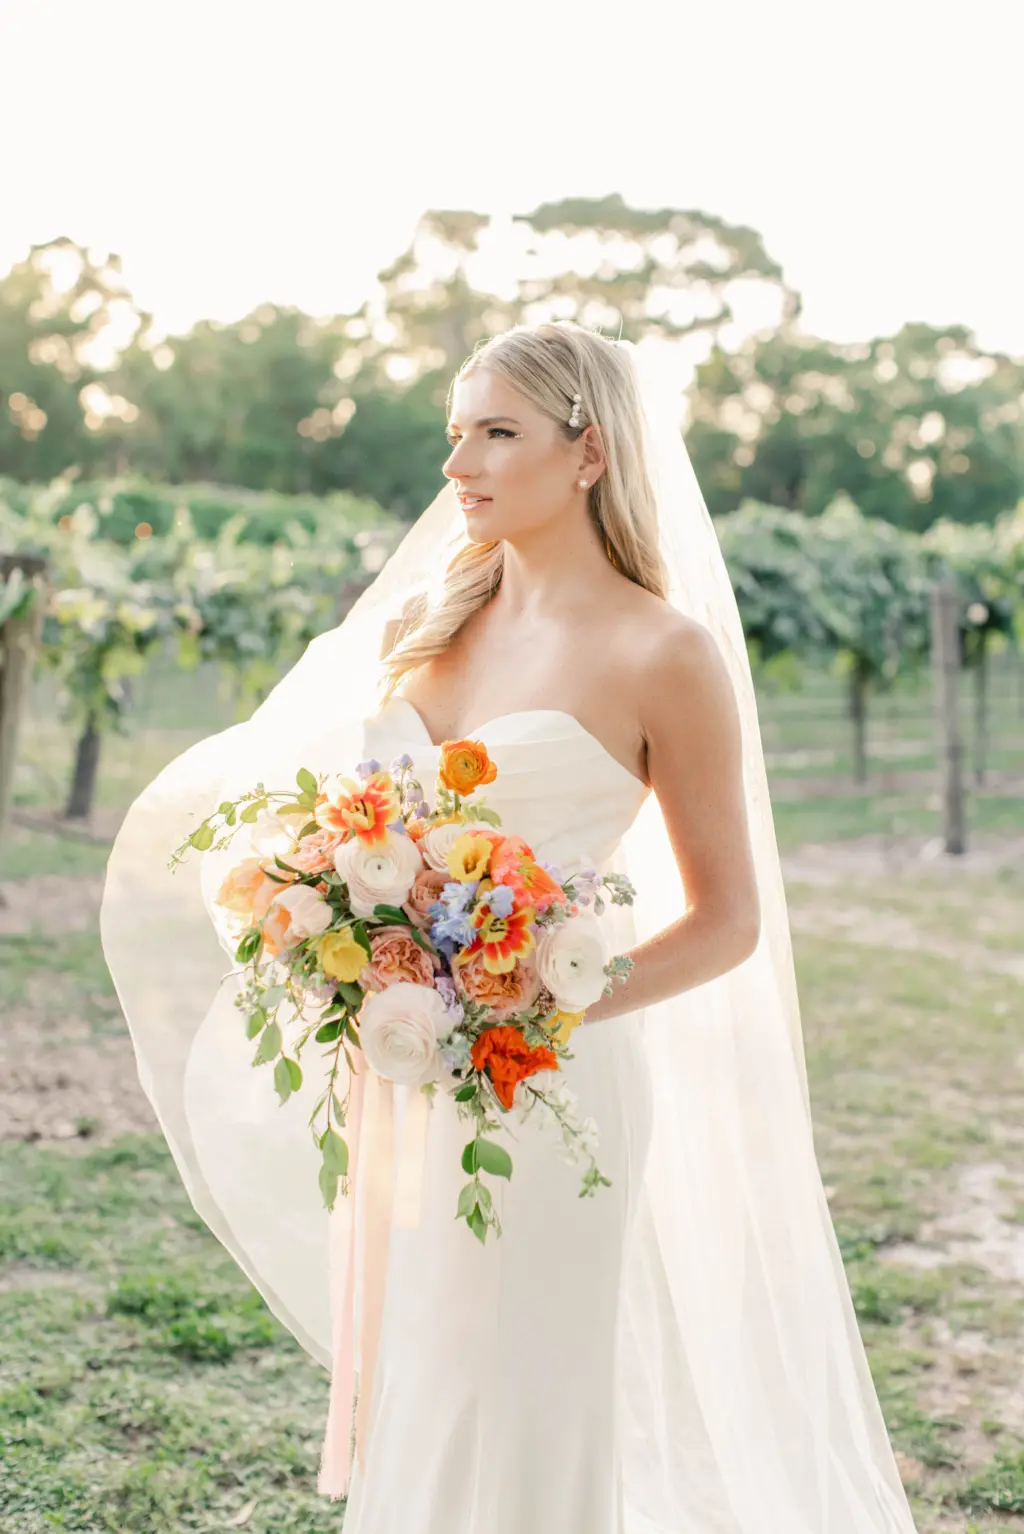 Ivory Strapless Chiffon Fit and Flare Wedding Dress Ideas | Colorful Spring Wildflower Bridal Wedding Bouquet Inspiration | Sarasota Florist Save The Date Florida | Tampa Bay Wedding Gown Boutique Truly Forever Bridal | Planner MDP Events